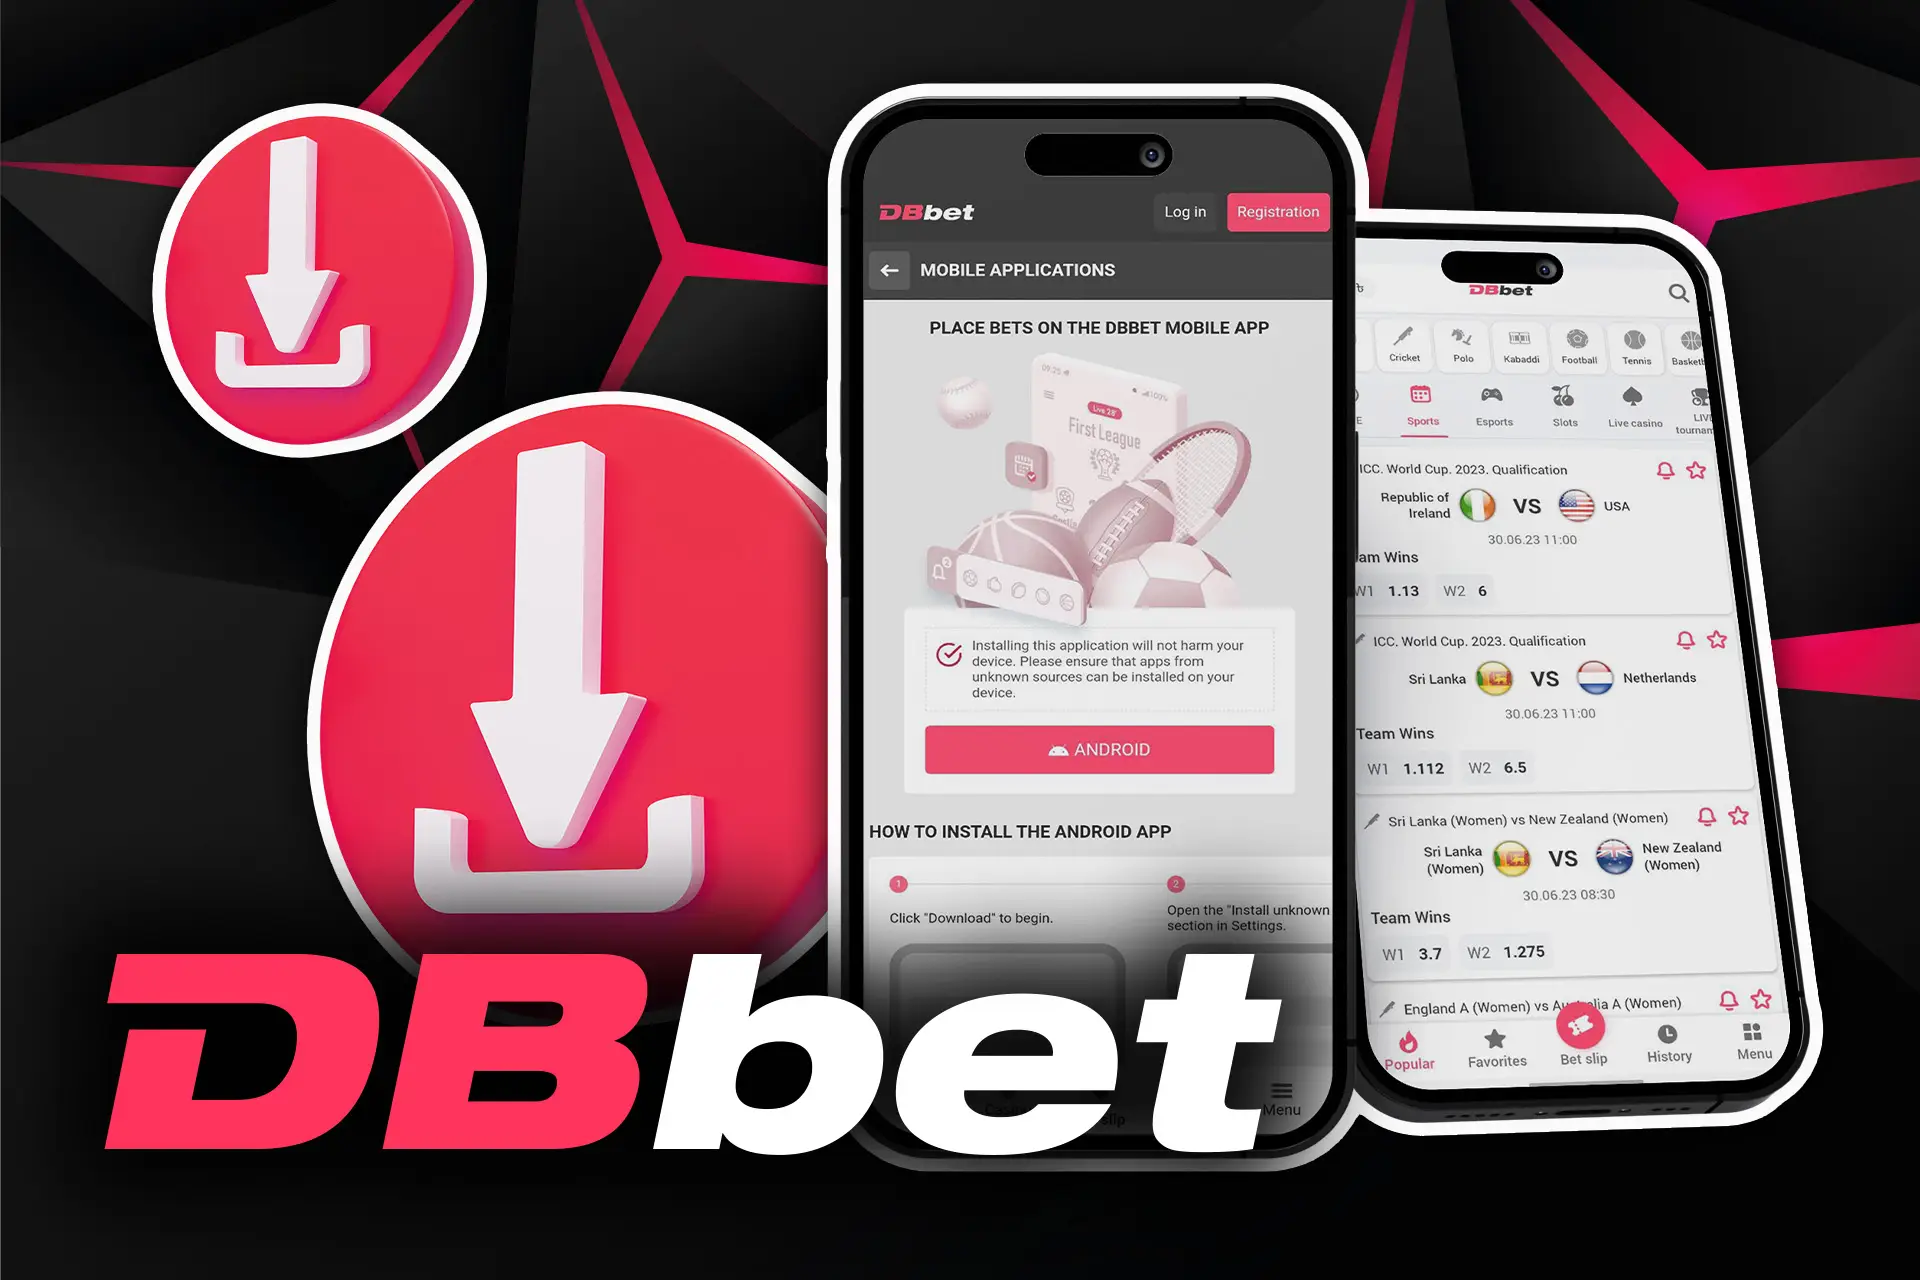 With these instructions it is easy to install the DBbet app.